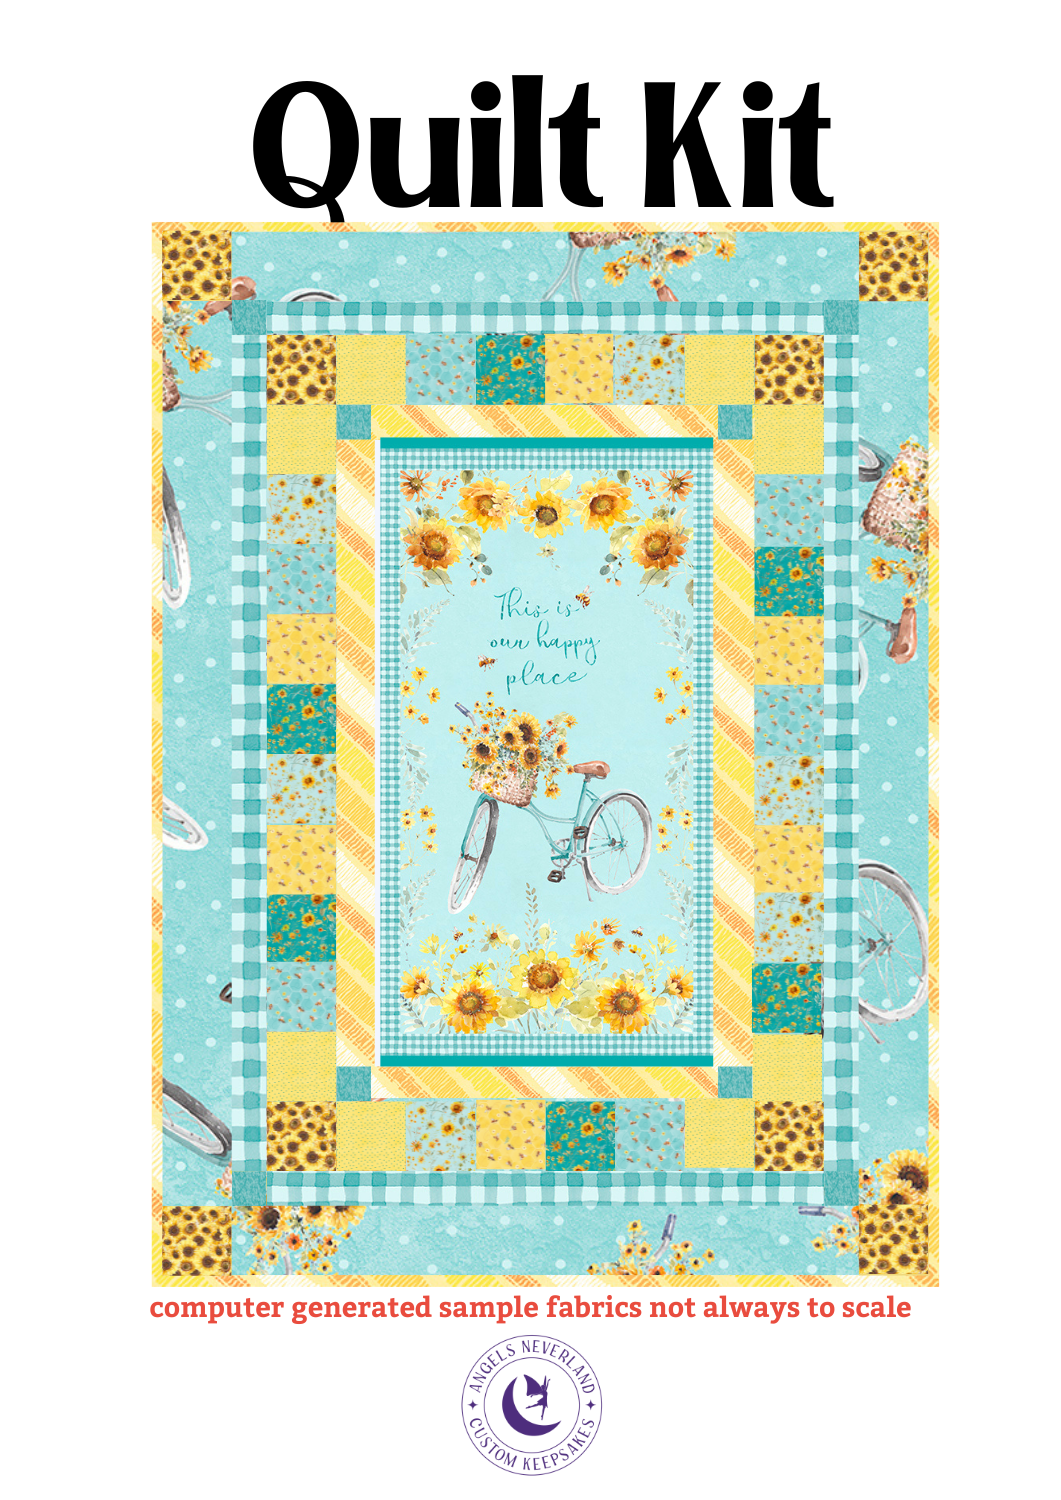 Baby Farm Animals Panel Piglet with Baby Chick and Calves Quilt Kit Design